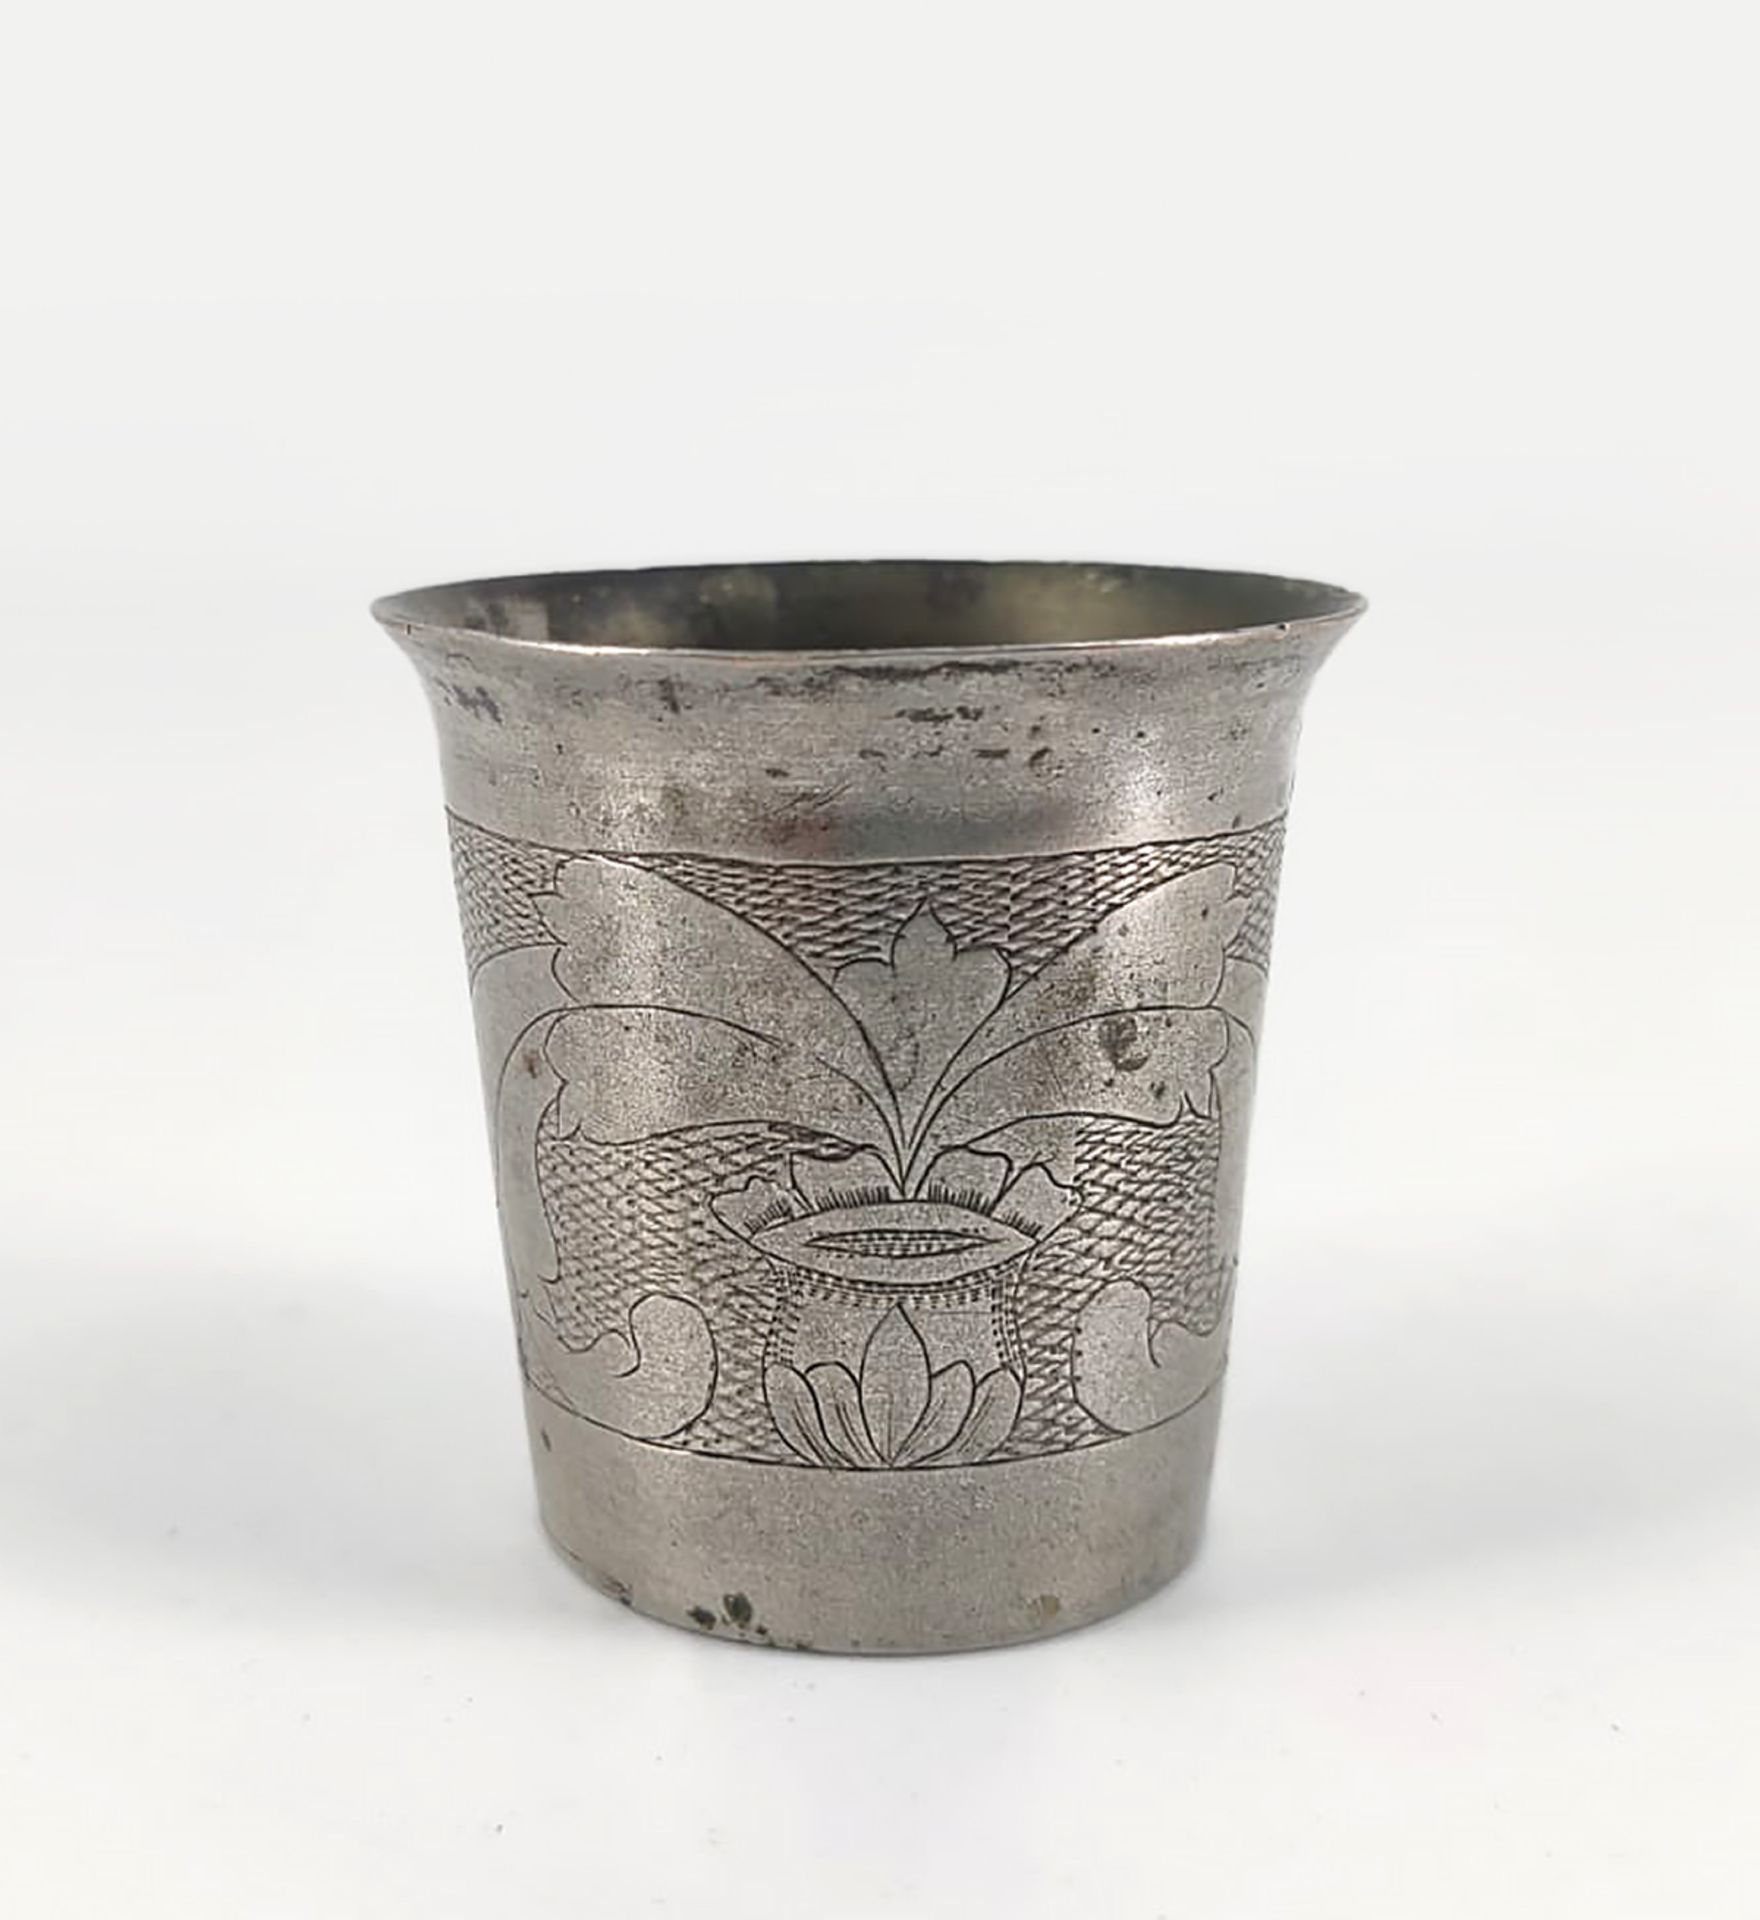 A Silver Kiddush Cup, Poland, Late 18th Early 19th Century - Image 2 of 5